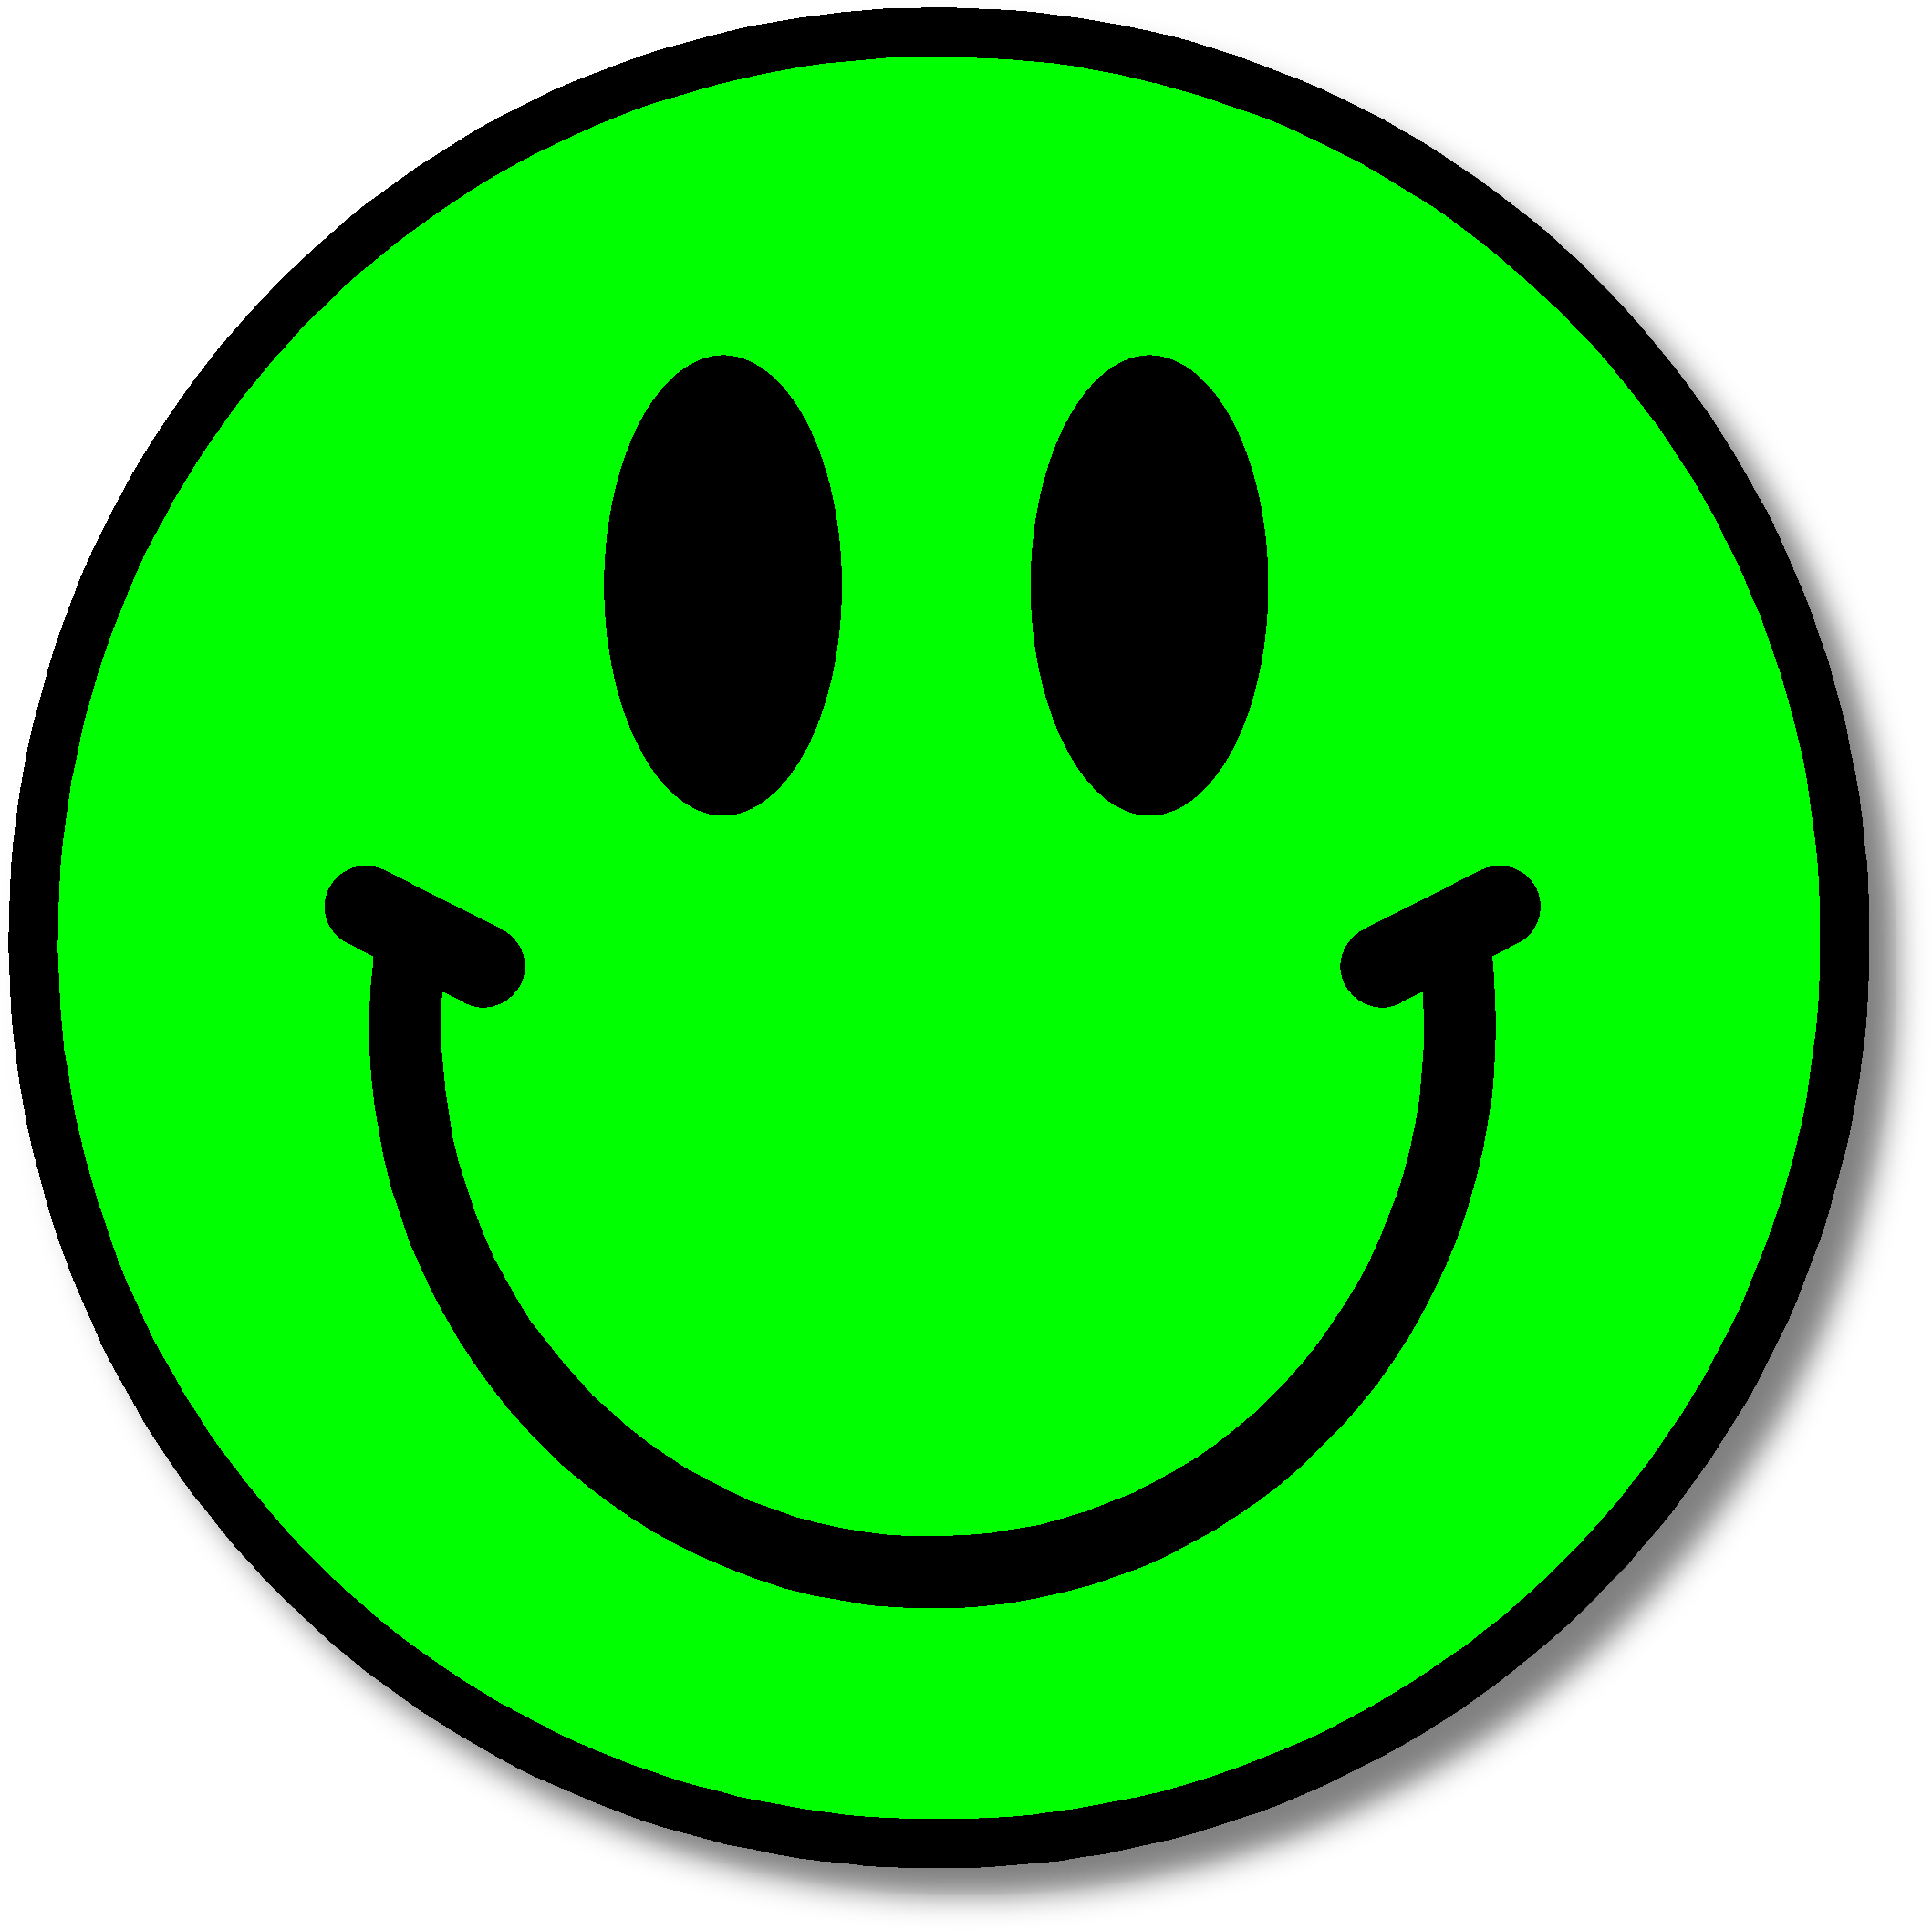 Happy Green Face Clipart Best